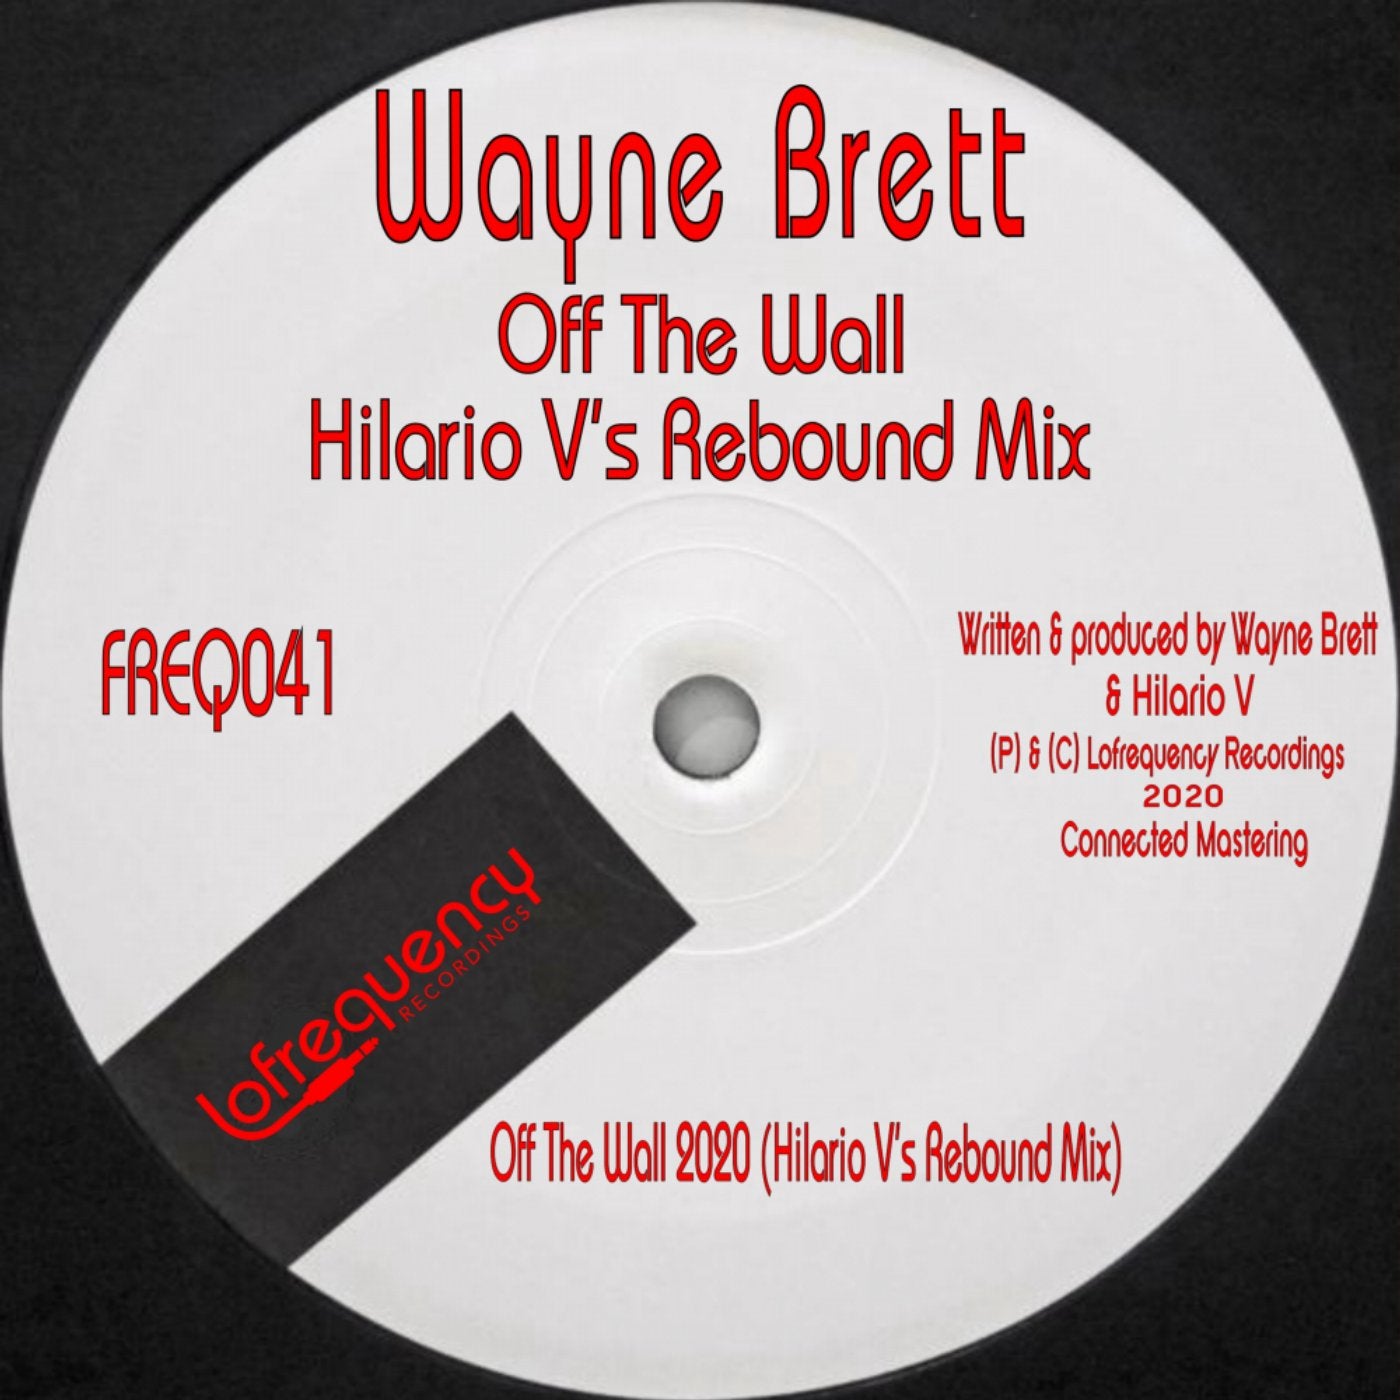 Off The Wall (Hilario V's Rebound Mix)